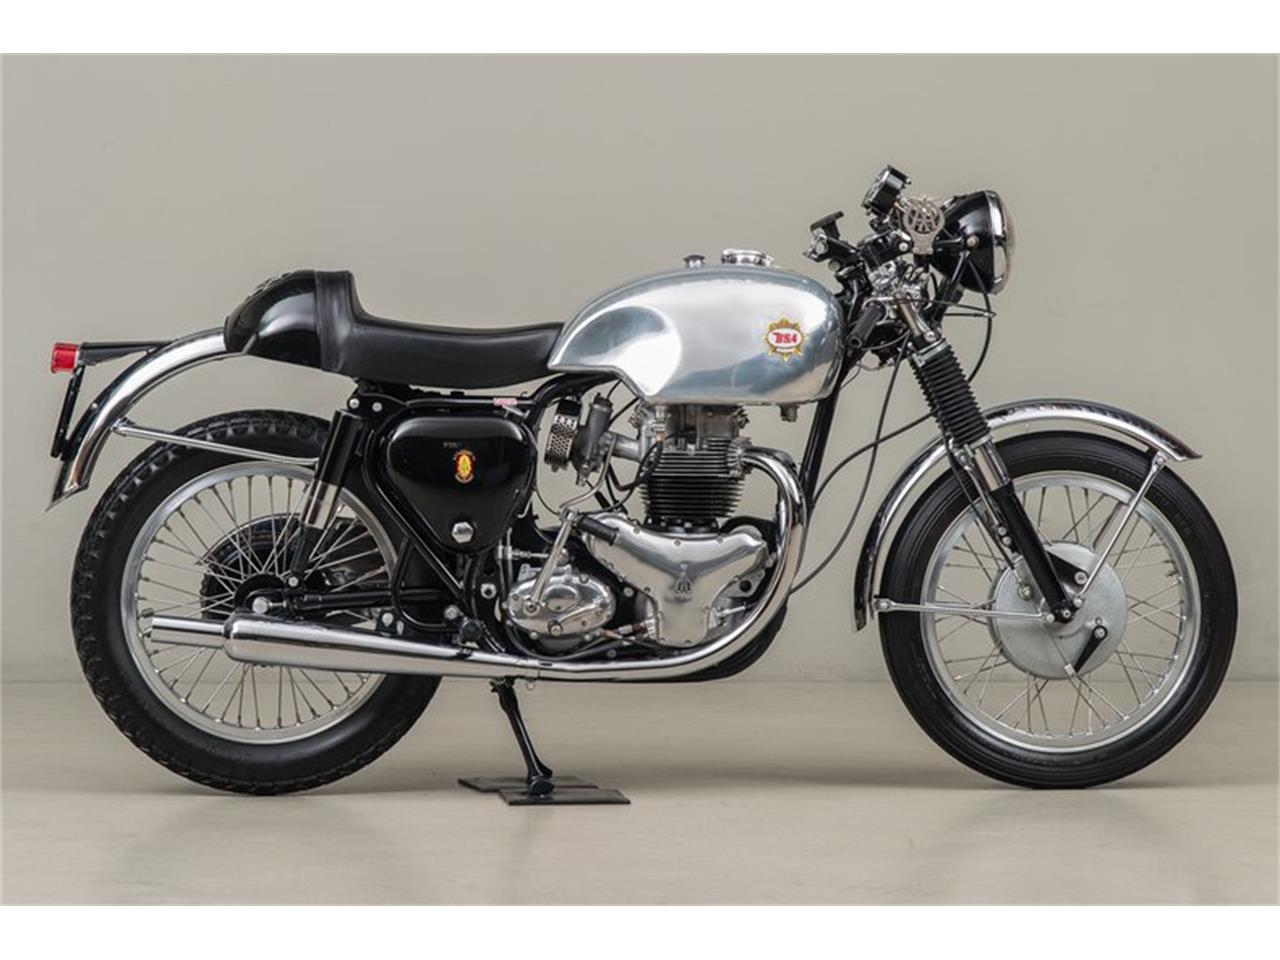 1963 BSA Motorcycle for sale in Scotts Valley, CA – photo 2